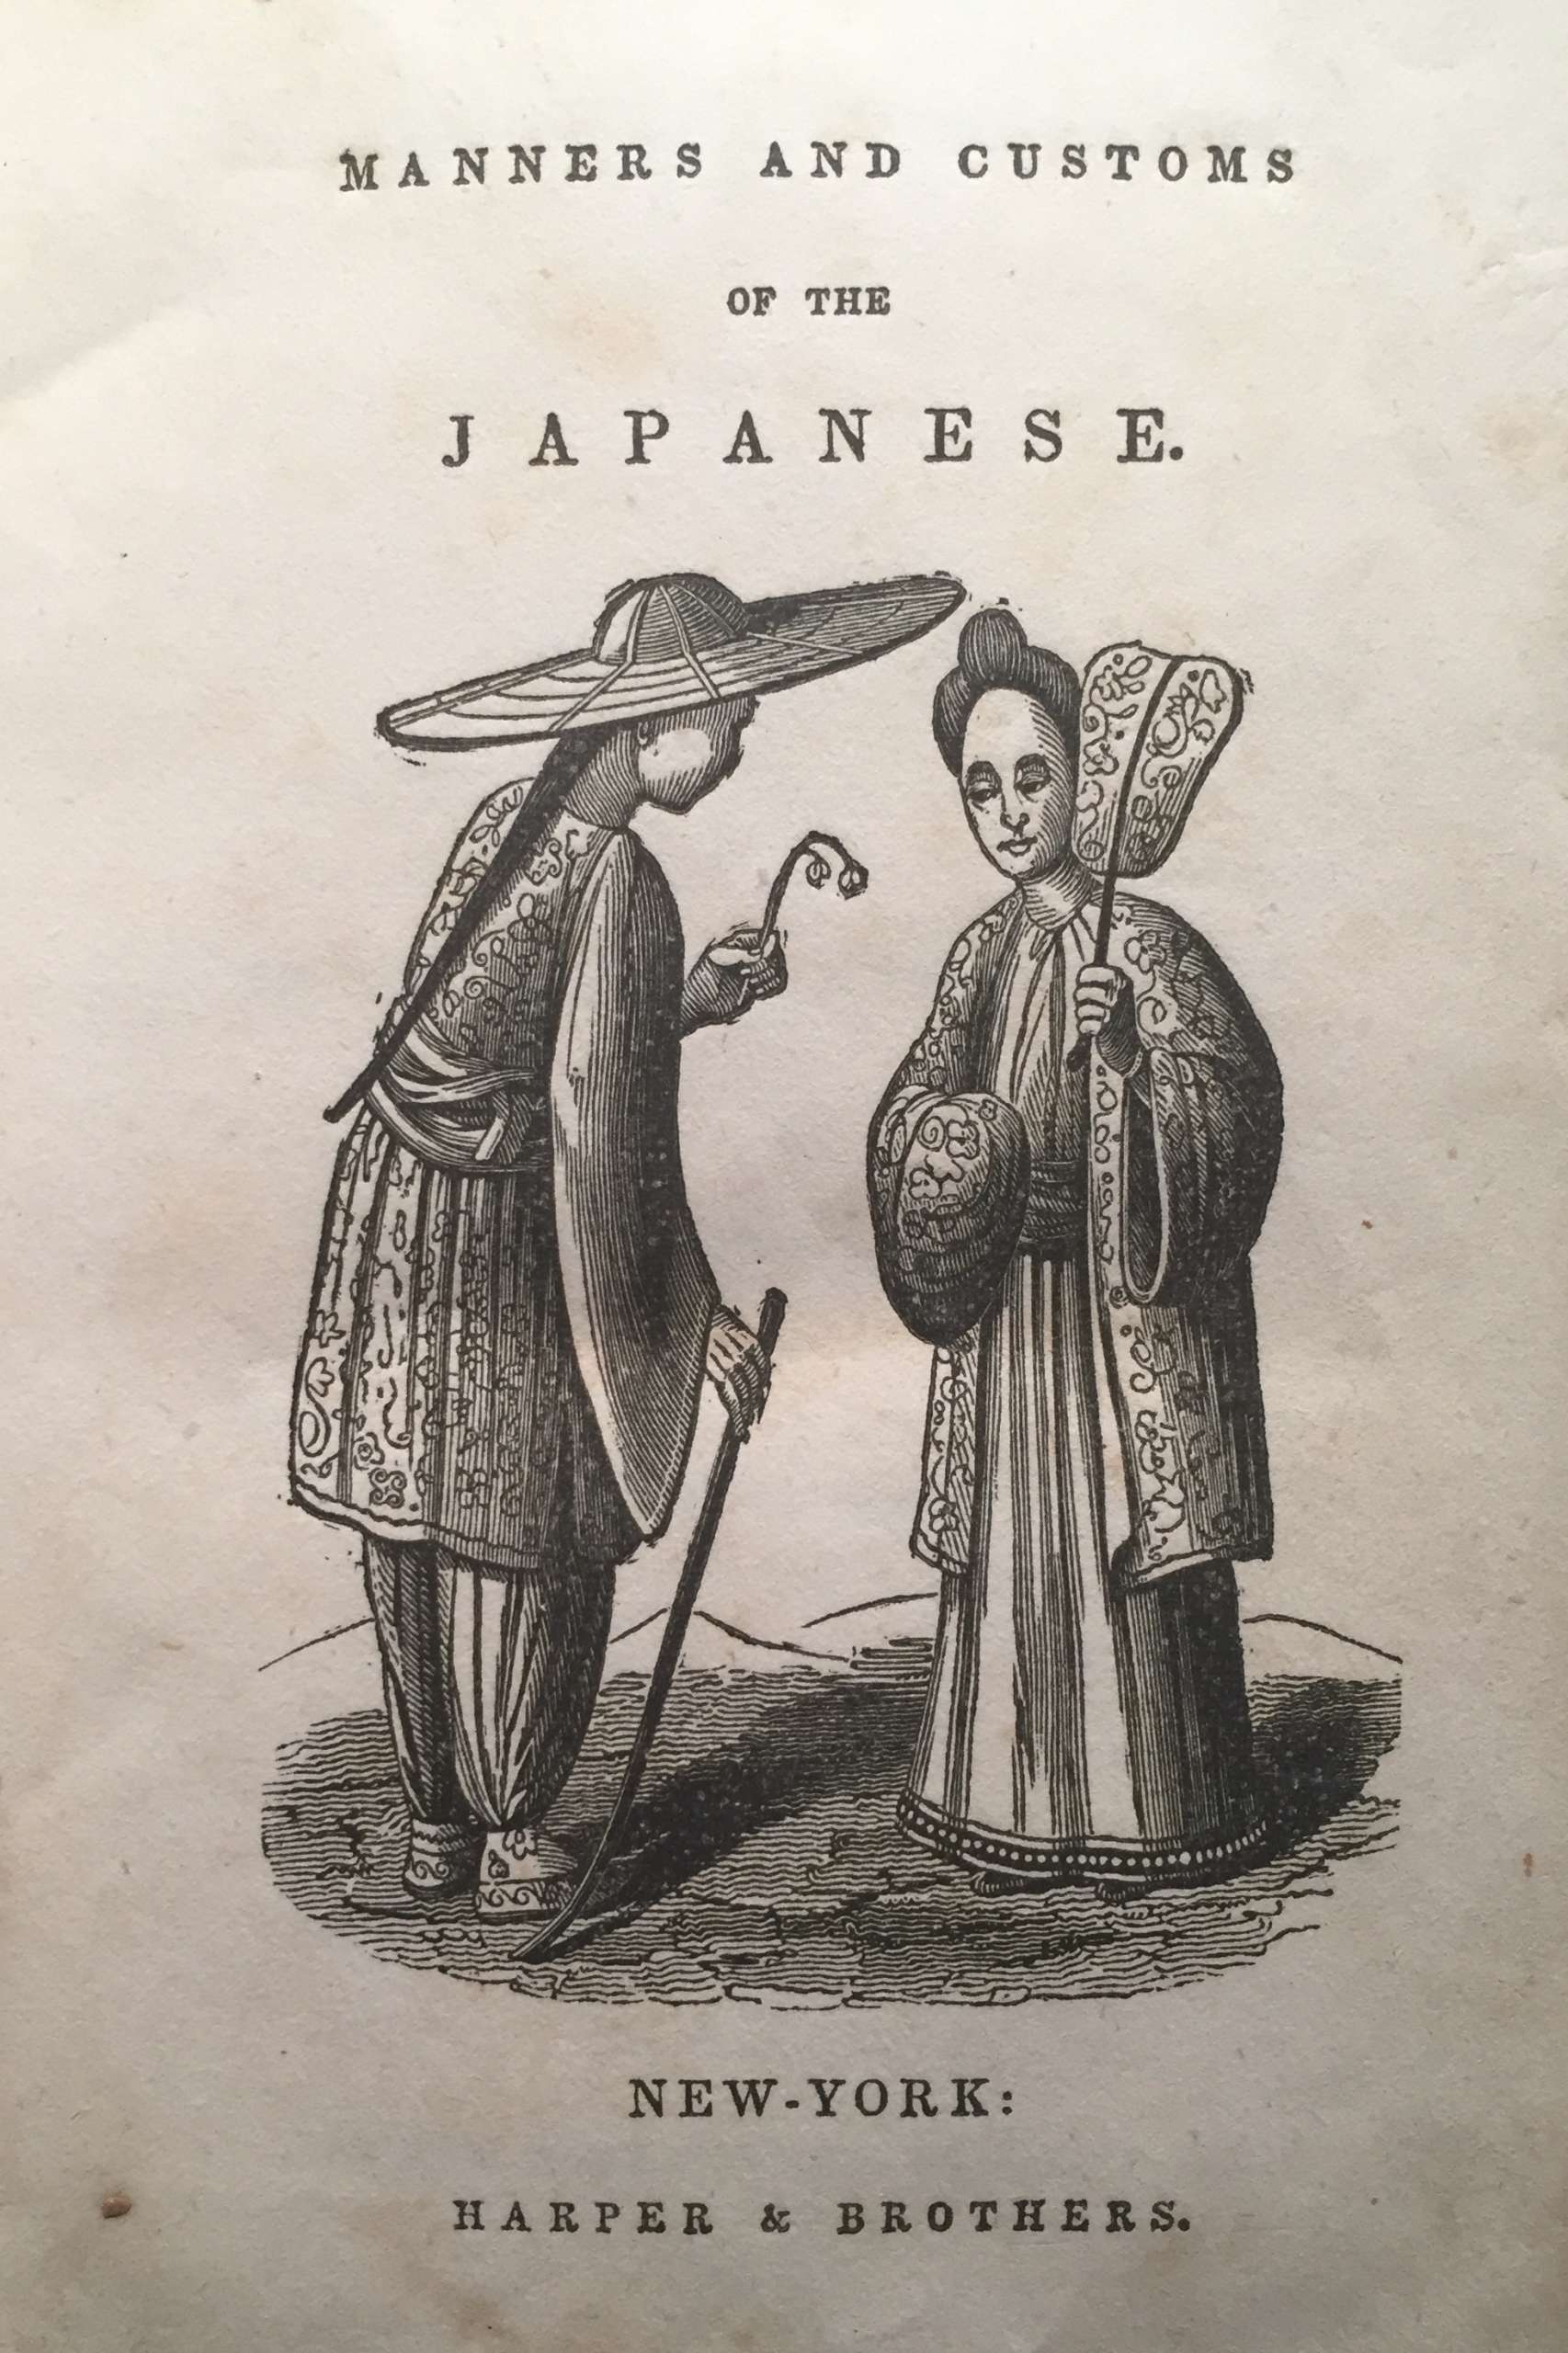 Philipp Franz von Siebold. Manners and Customs of the Japanese, in the Nineteenth Century. 1841.